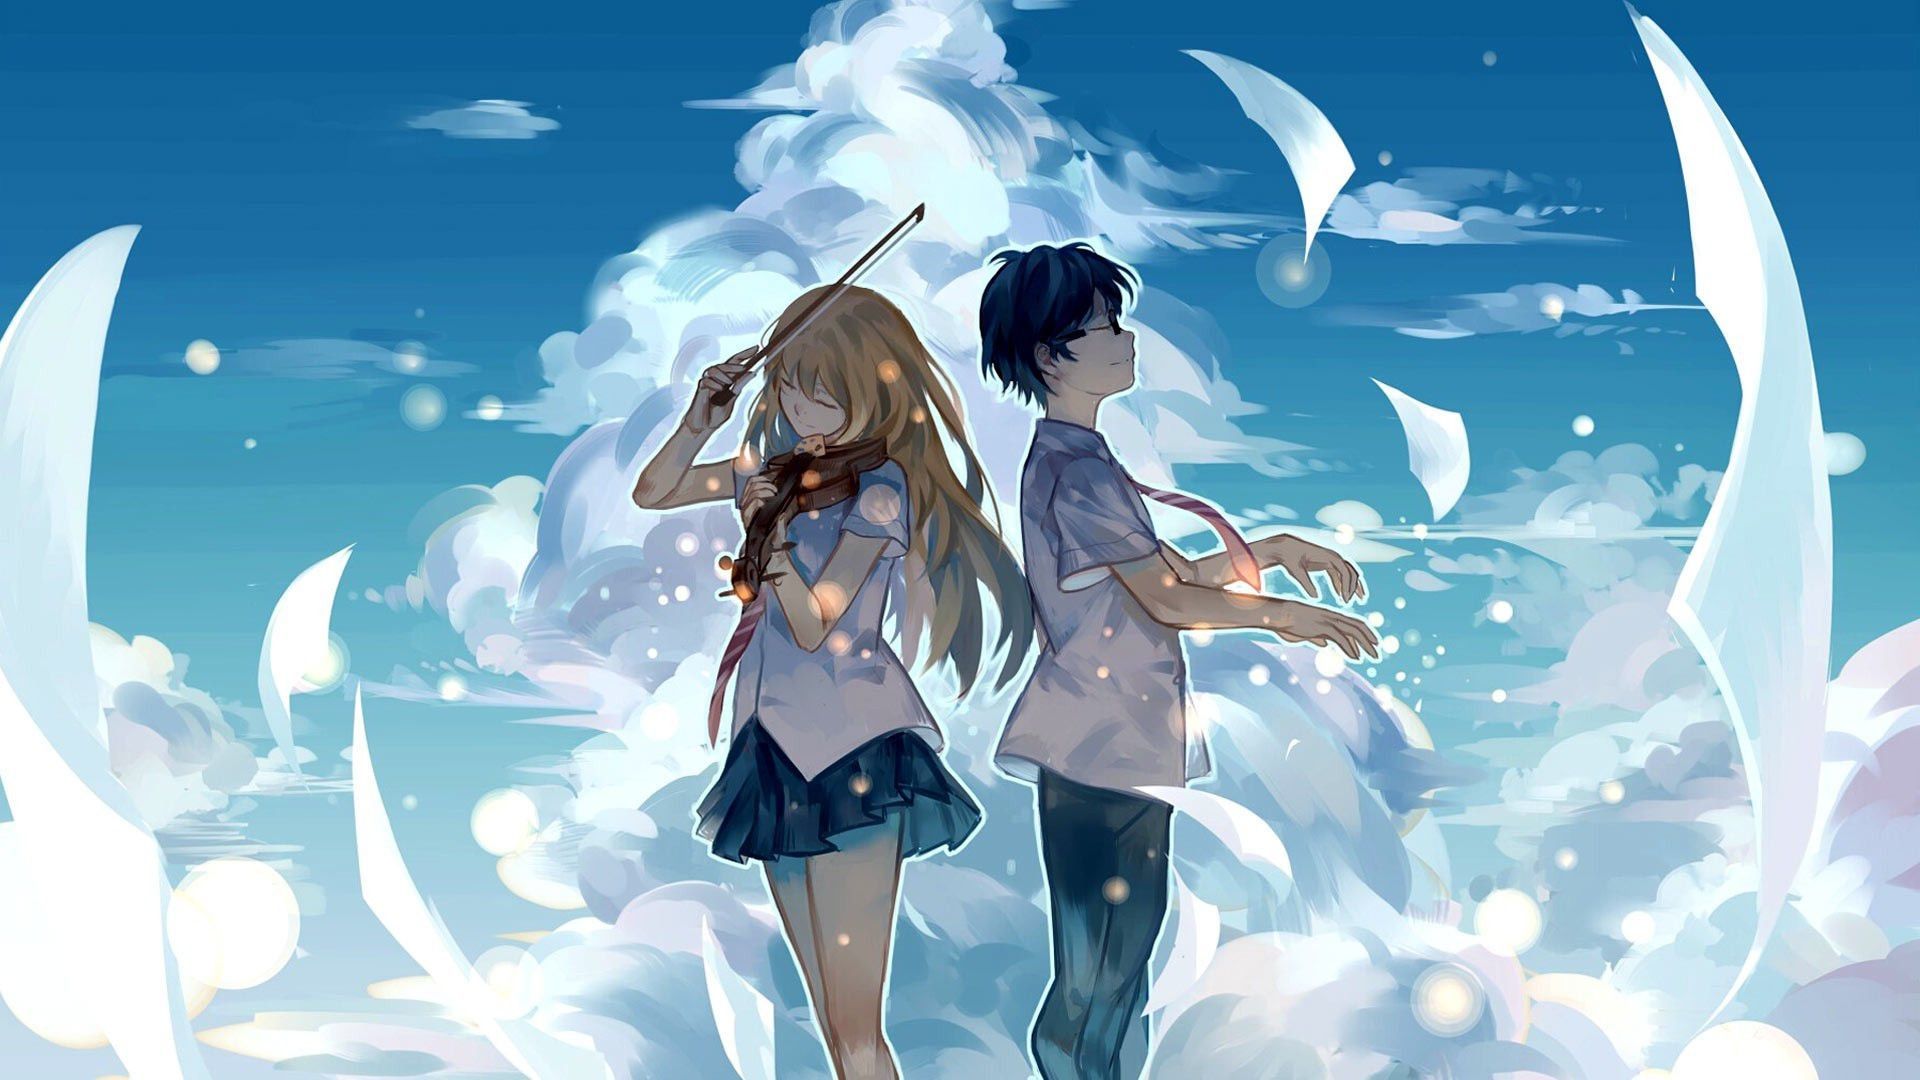 Anime Couples Wallpapers on